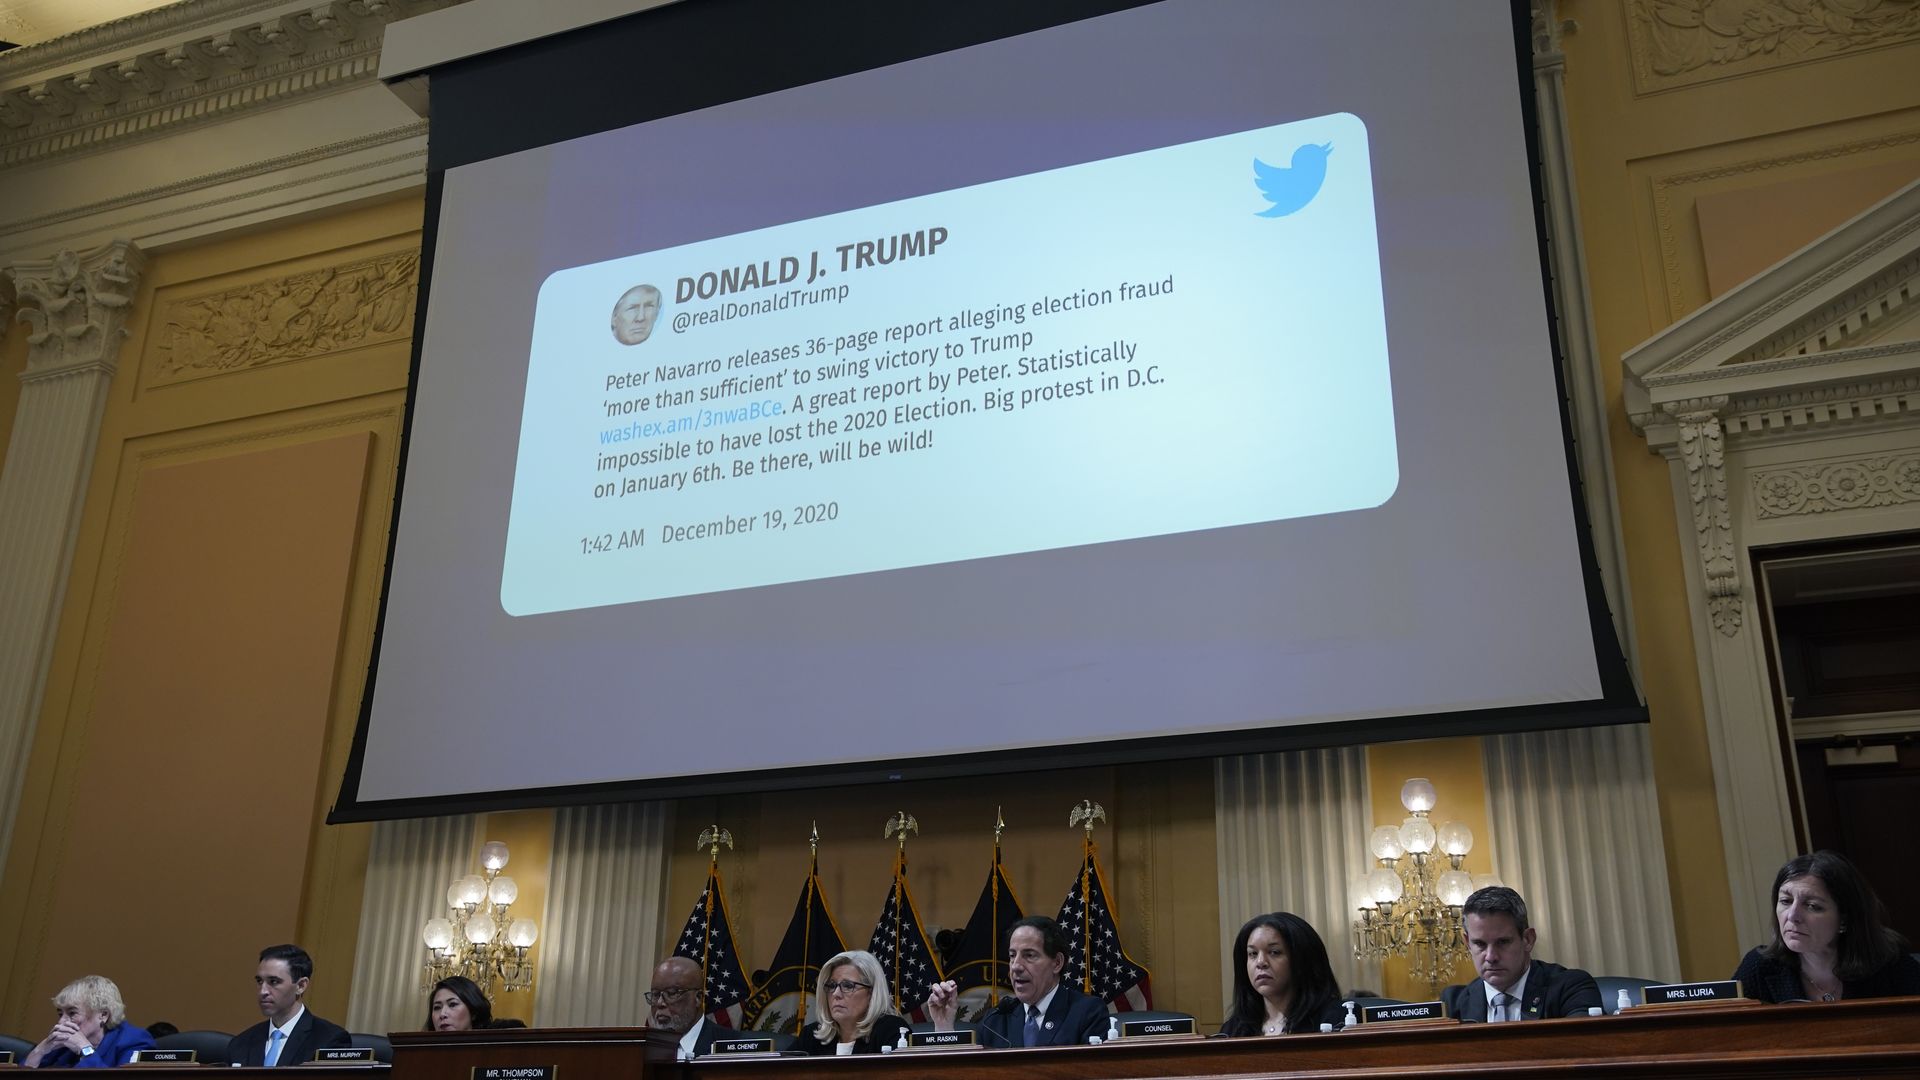 A draft tweet from former U.S. President Donald Trump appears on a video screen above members of the Select Committee to Investigate the January 6th Attack.